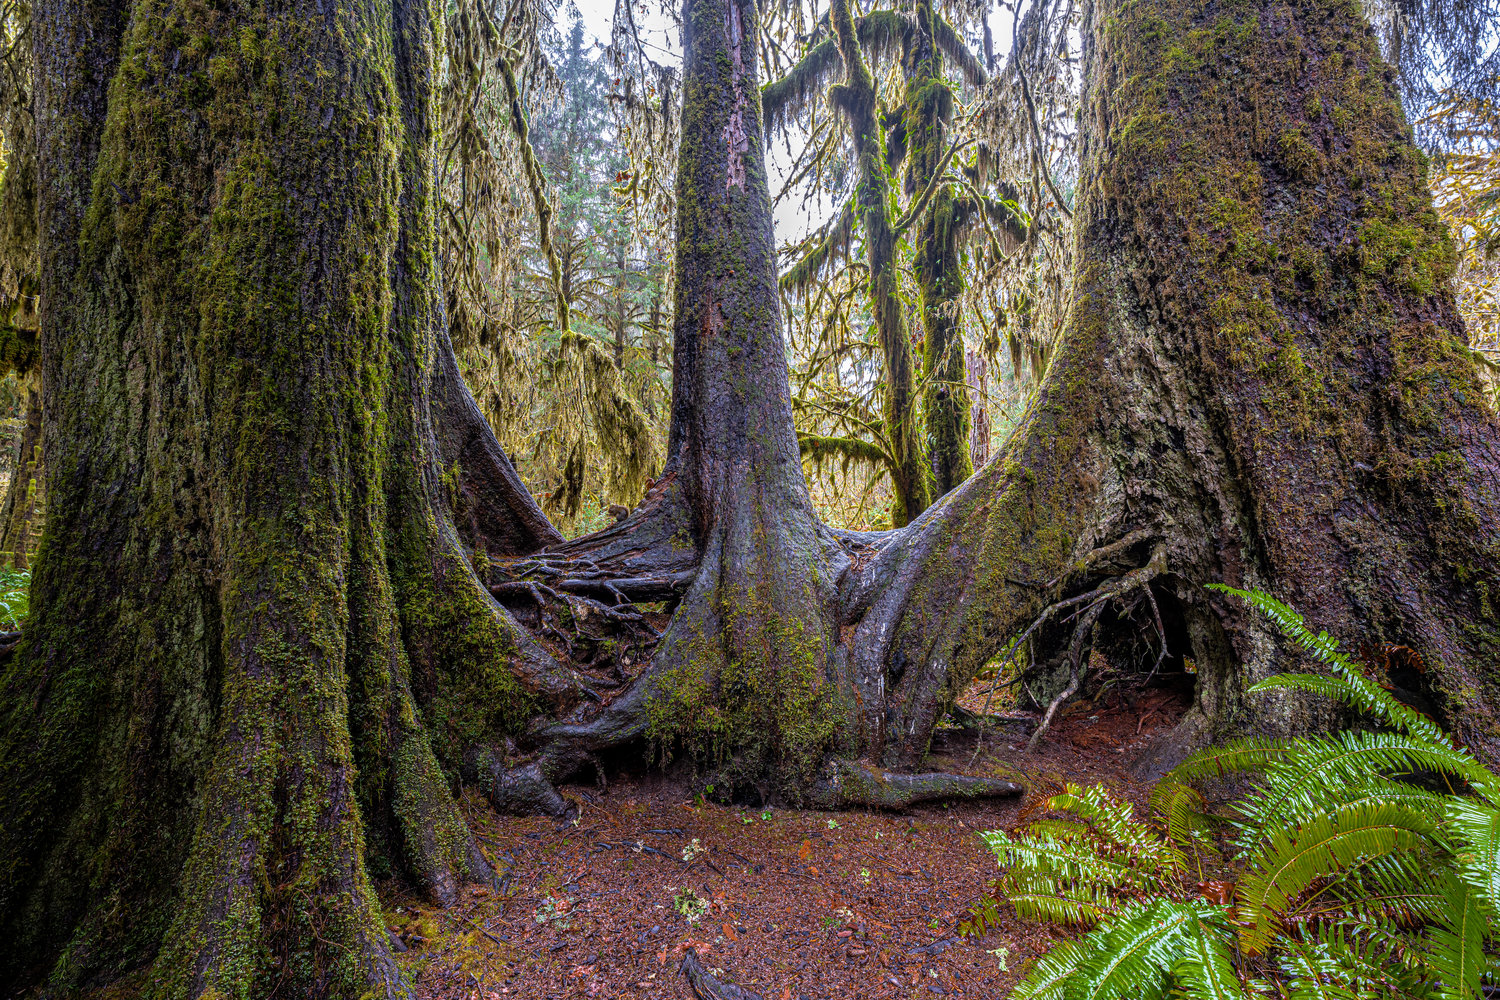 Three of Washington's dwindling giants are shown in this photo, taken in the Hoh Rainforest -- which is not part of a planned tree sale.